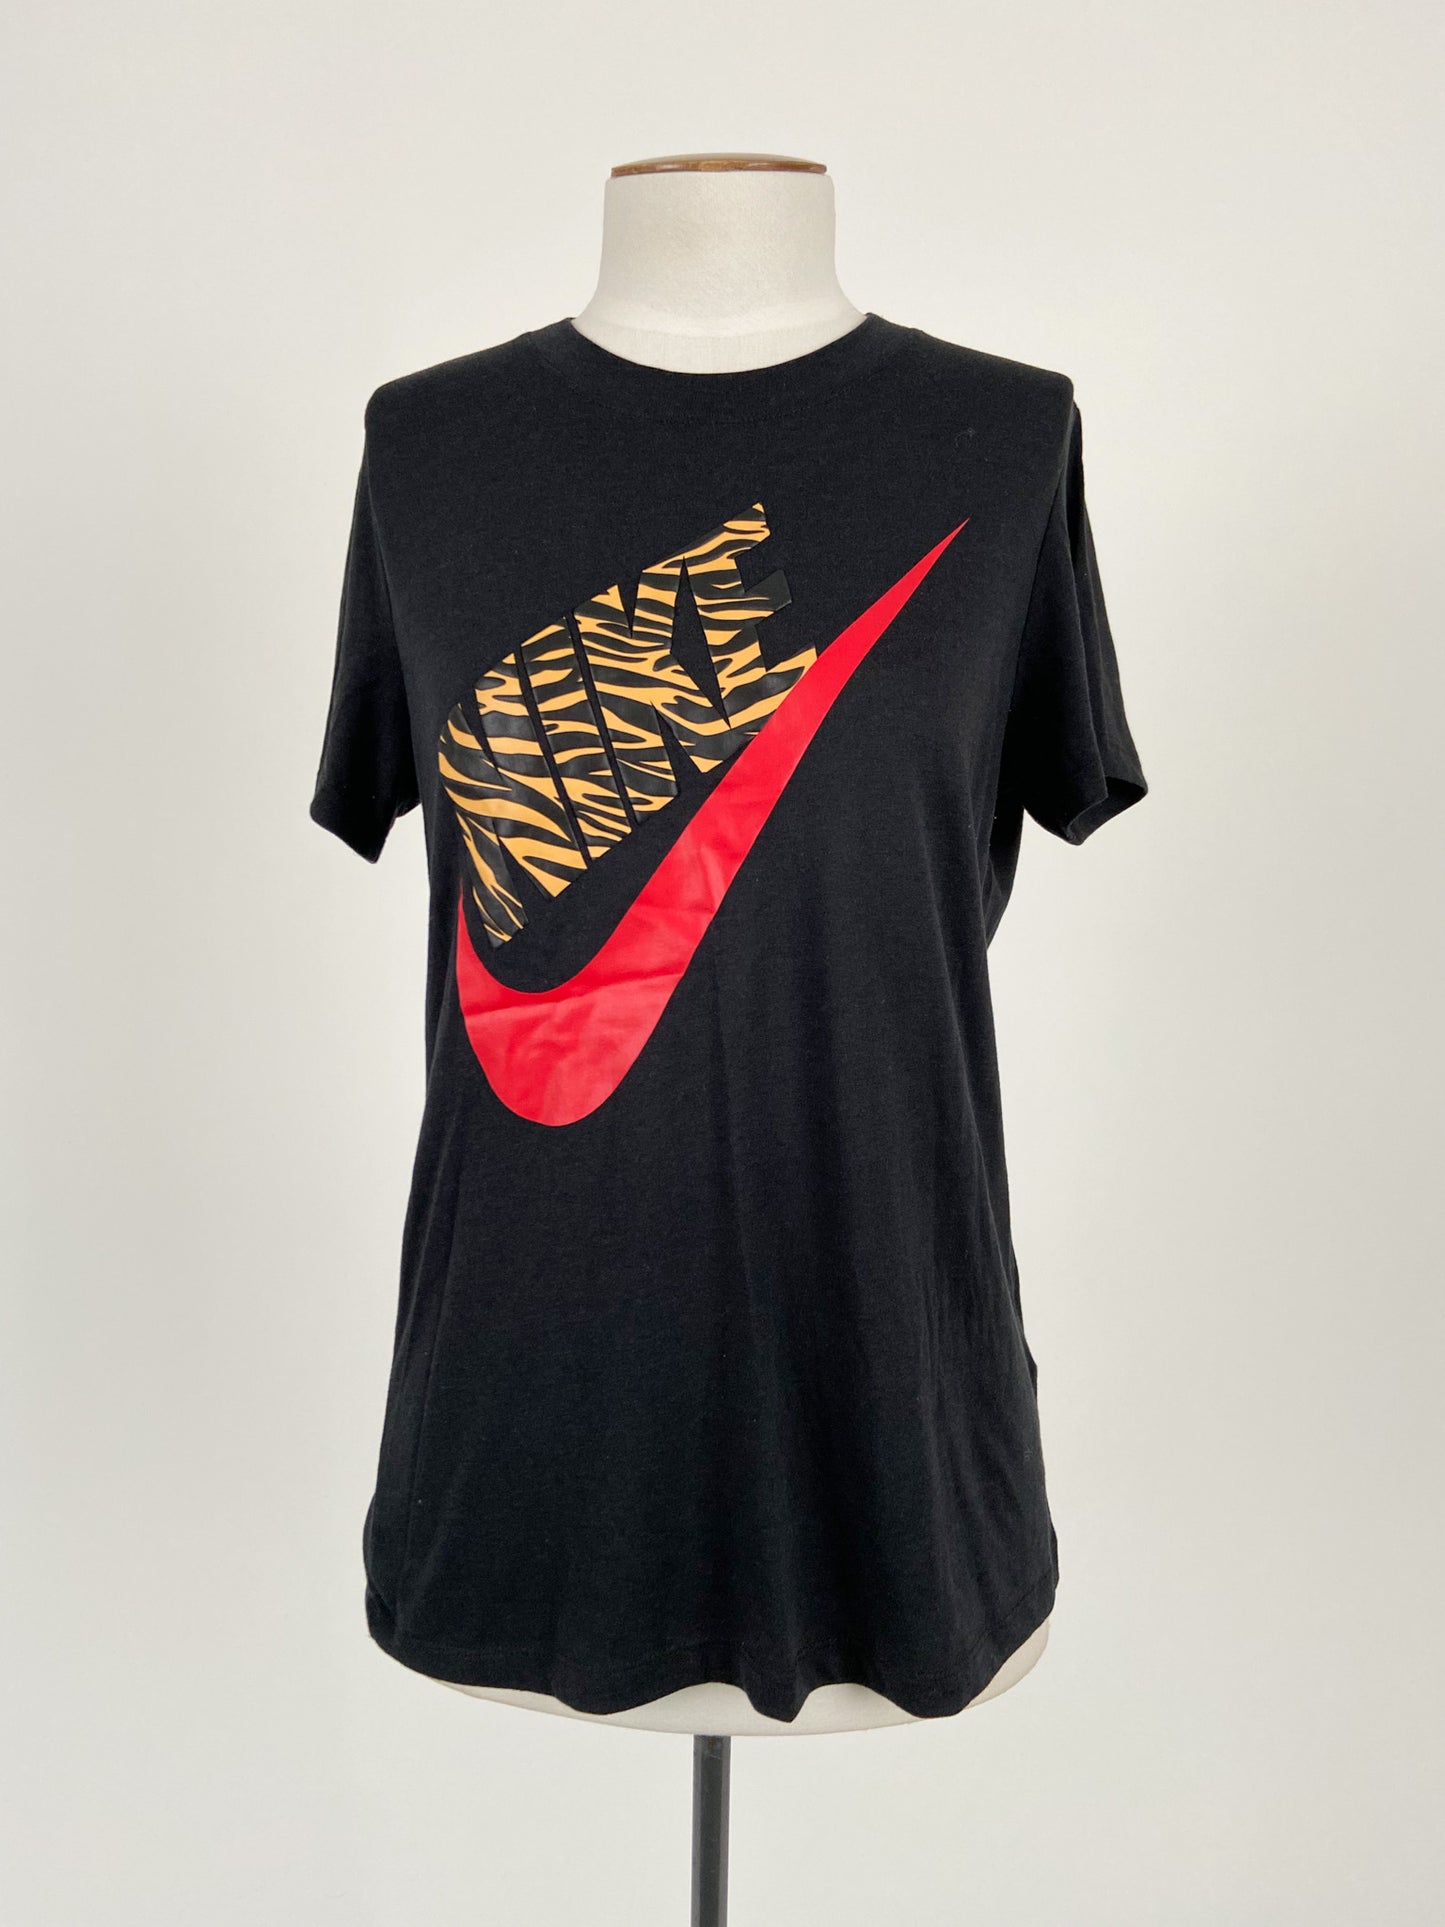 Nike | Black Casual Top | Size S